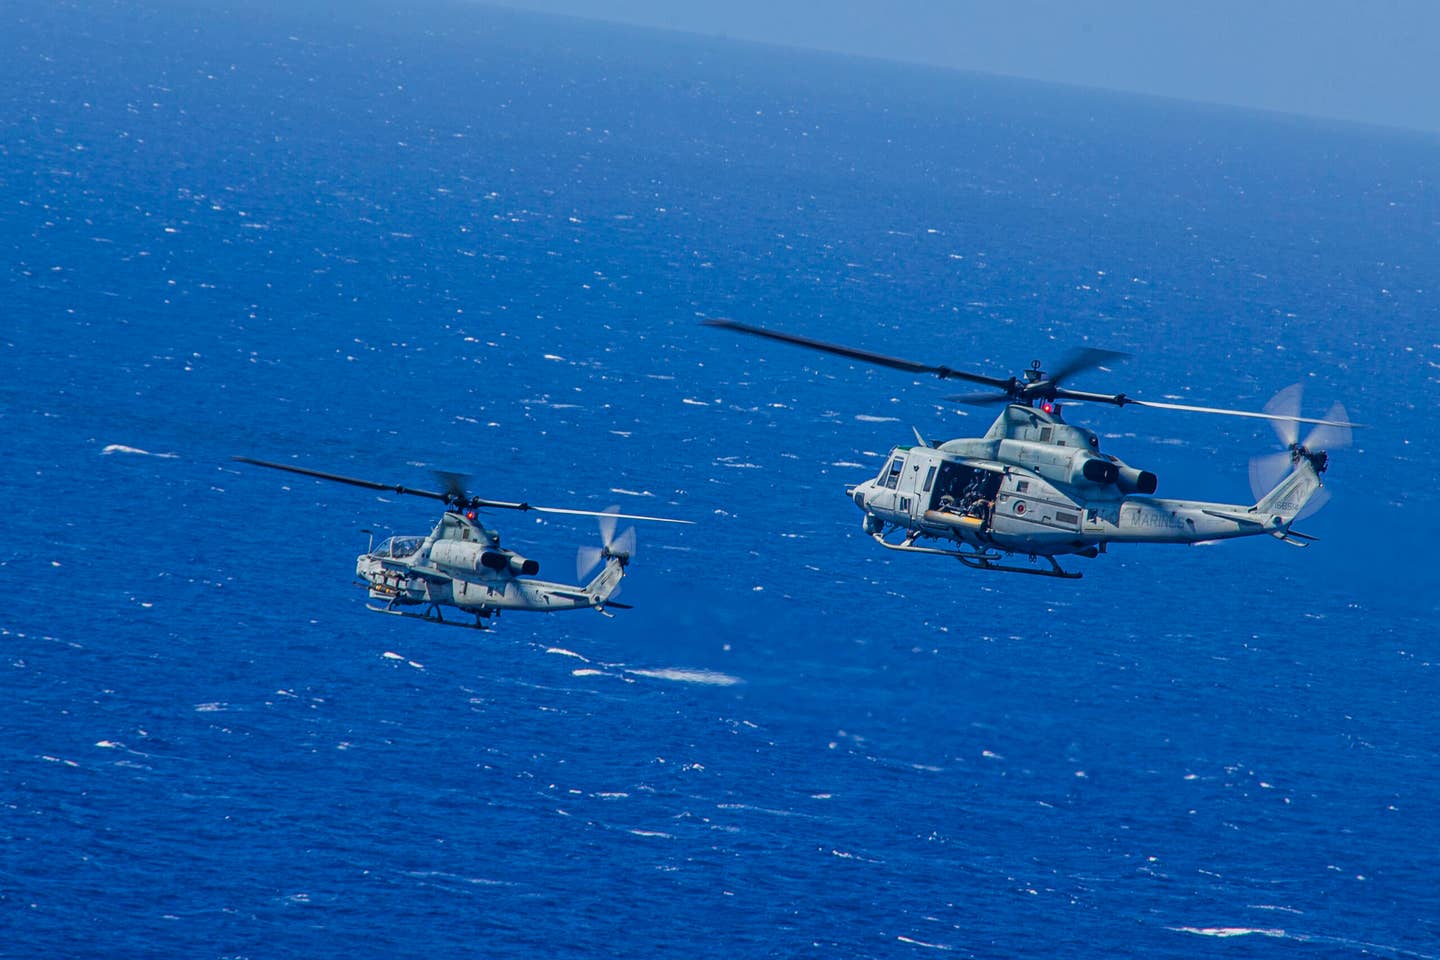 U.S. Marines with Marine Light Helicopter Attack Squadron 367 operate an AH-1Z Viper and UH-1Y Venom during a joint maritime strike exercise with U.S. Navy Helicopter Maritime Strike Squadron 37 over Pacific Missile Range Facility, Hawaii, June 9, 2020. (U.S. Marine Corps photo by Lance Cpl. Jacob Wilson)